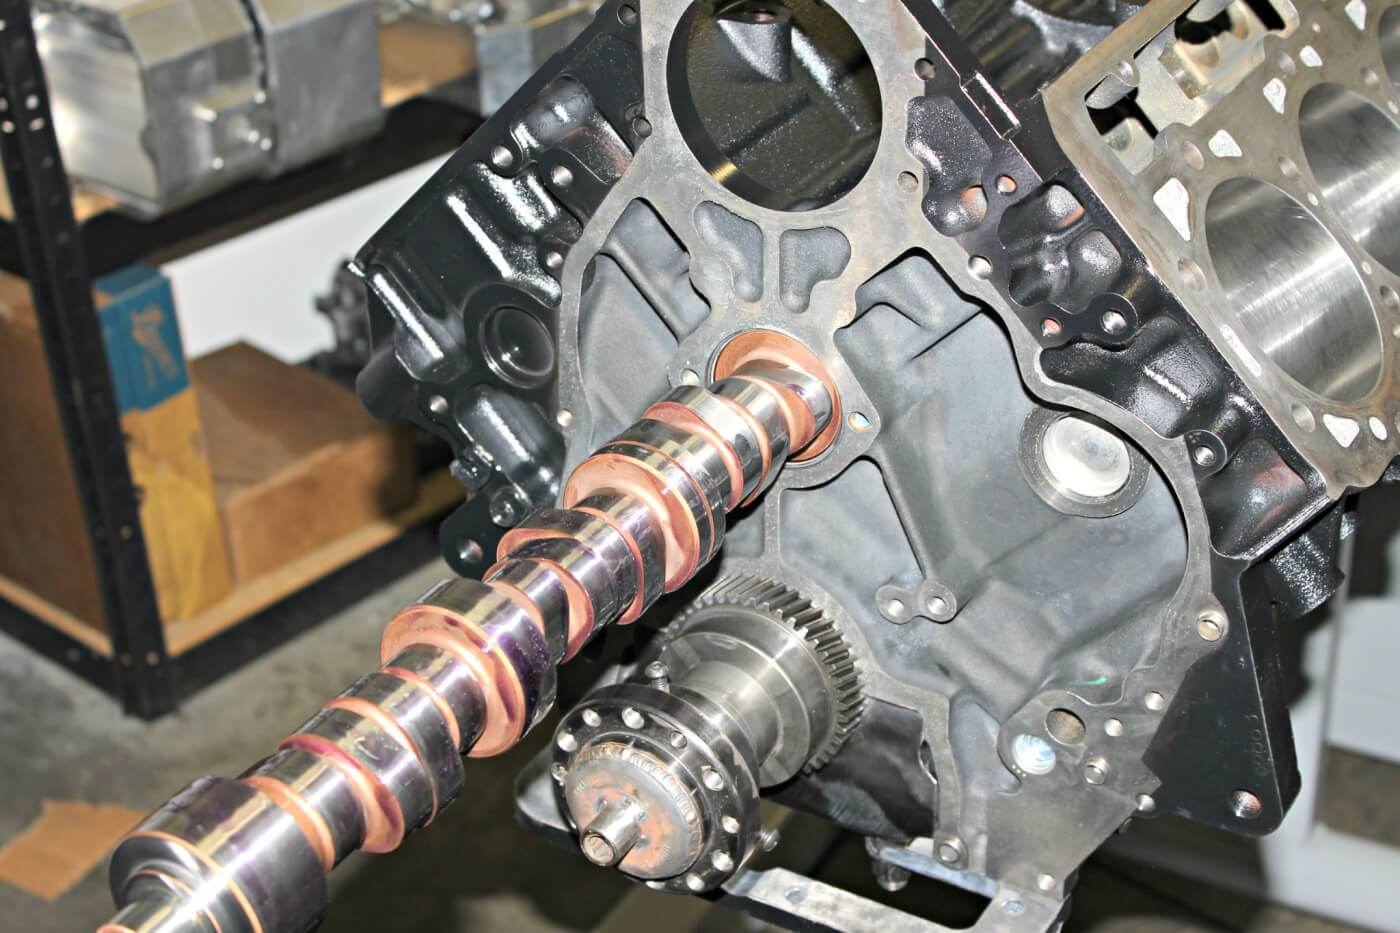 2. Unfortunately, in the Duramax application, swapping out the camshaft isn’t an easy Saturday job, as the entire engine needs to be torn down to make the change properly. In most cases, making a camshaft swap would be recommended only when doing other internal engine work. Because of this, most camshafts are installed with multiple other changes like billet connecting rods, performance pistons, and cylinder head modifications, so it’s hard to get true back-to-back comparisons on a simple “cam swap.”